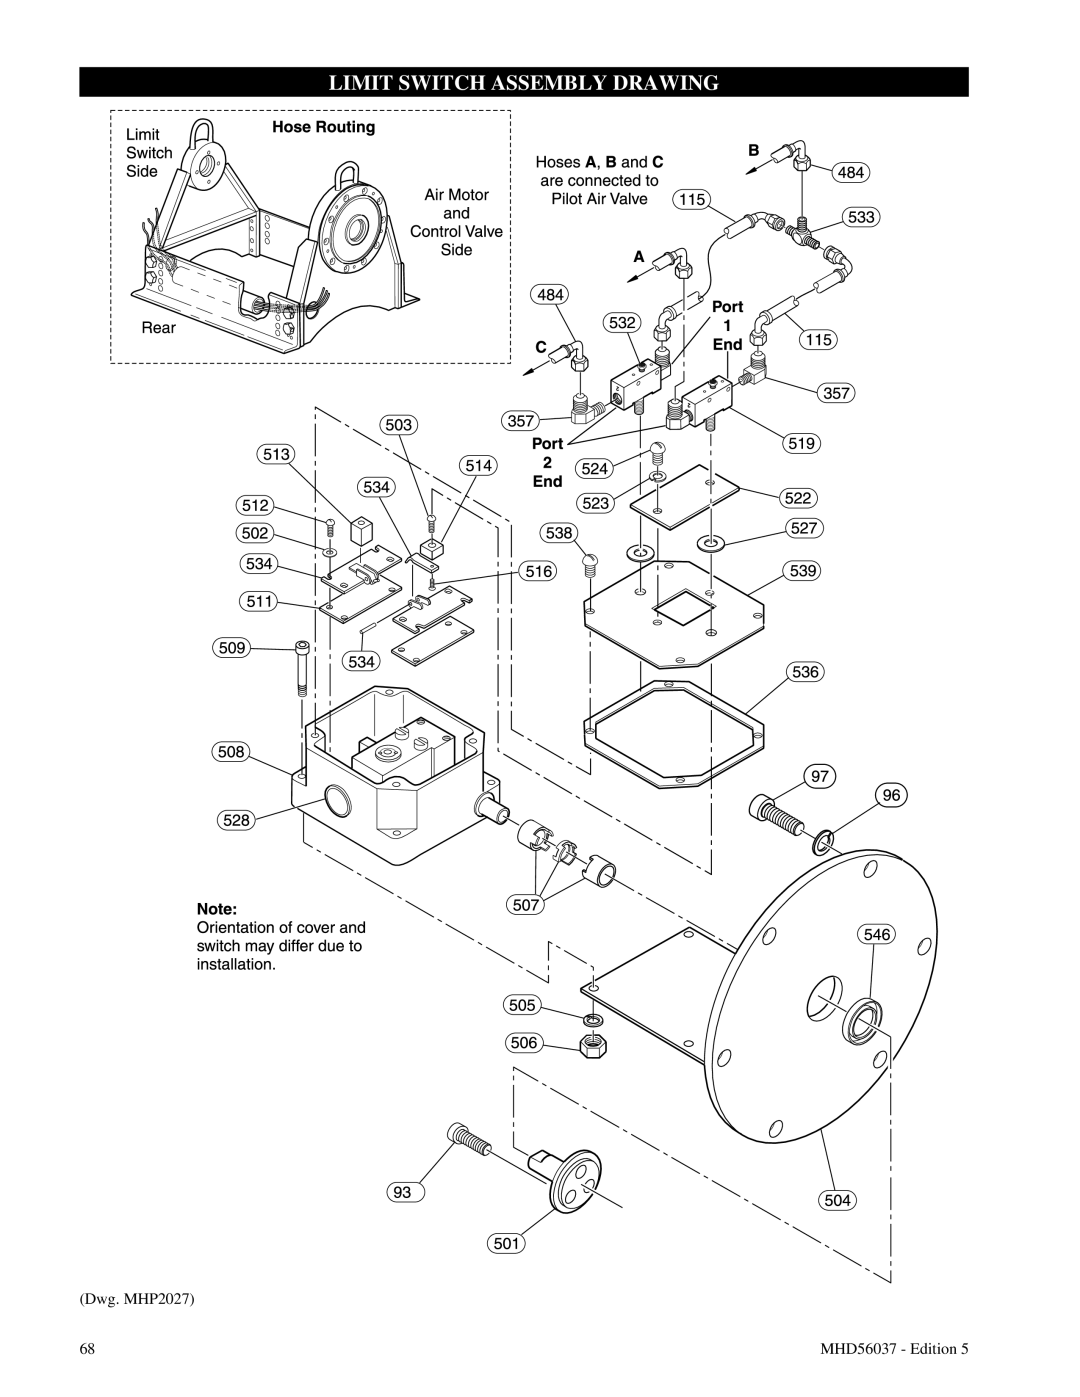 Ingersoll-Rand FA5T manual Limit Switch Assembly Drawing, Dwg. MHP2027, MHD56037 - Edition 